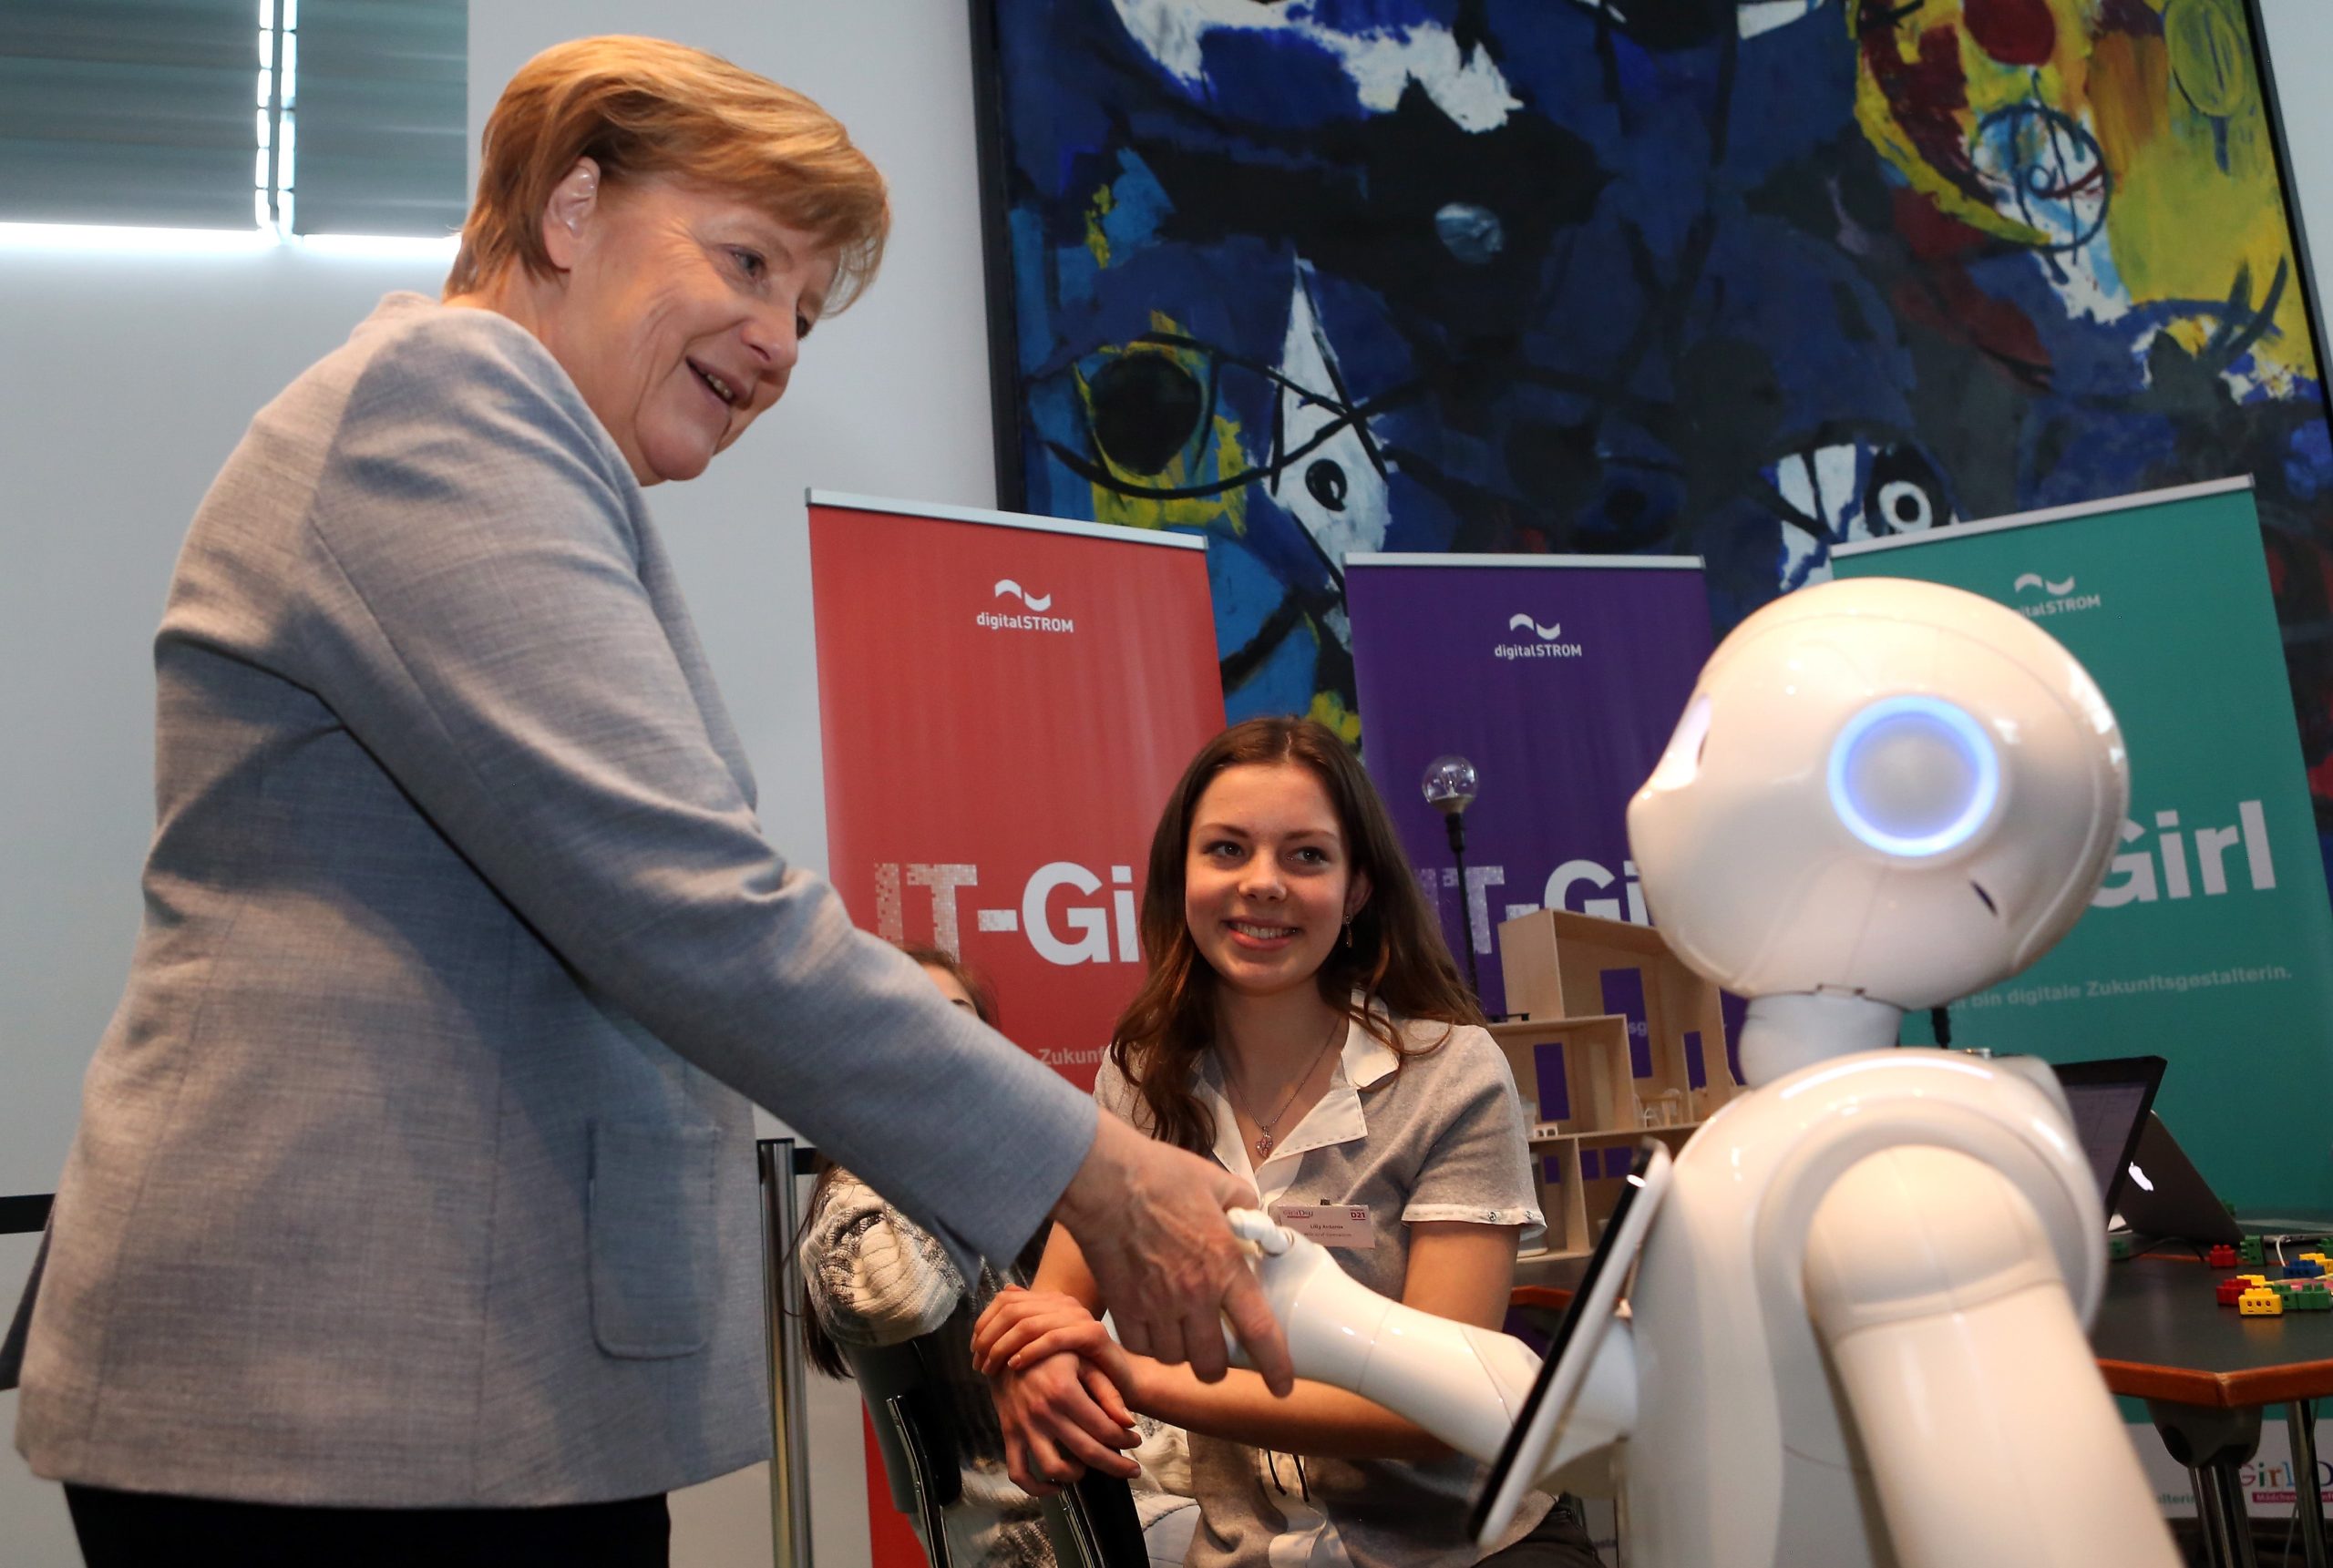 German Chancellor Angela Merkel is introduced to Pepper the Robot by participant Lilly Antonia on Girls' Day on April 26, 2017 in Berlin, Germany. (Photo: Adam Berry, Getty Images)